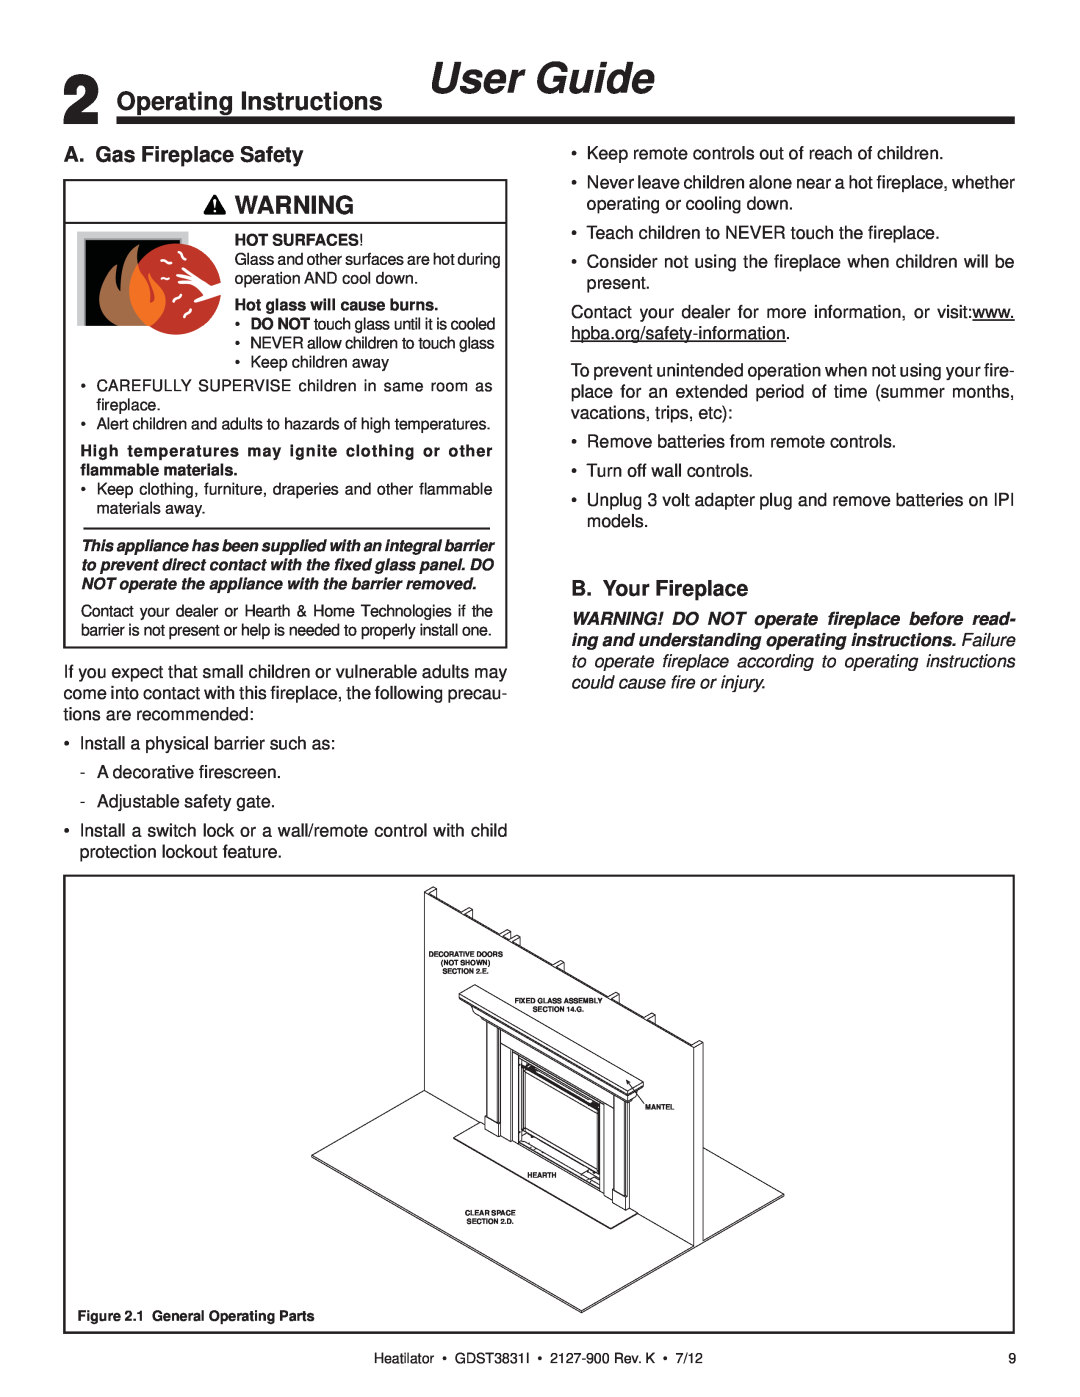 Heatiator GDST3831I owner manual Operating Instructions User Guide, A. Gas Fireplace Safety, B. Your Fireplace 